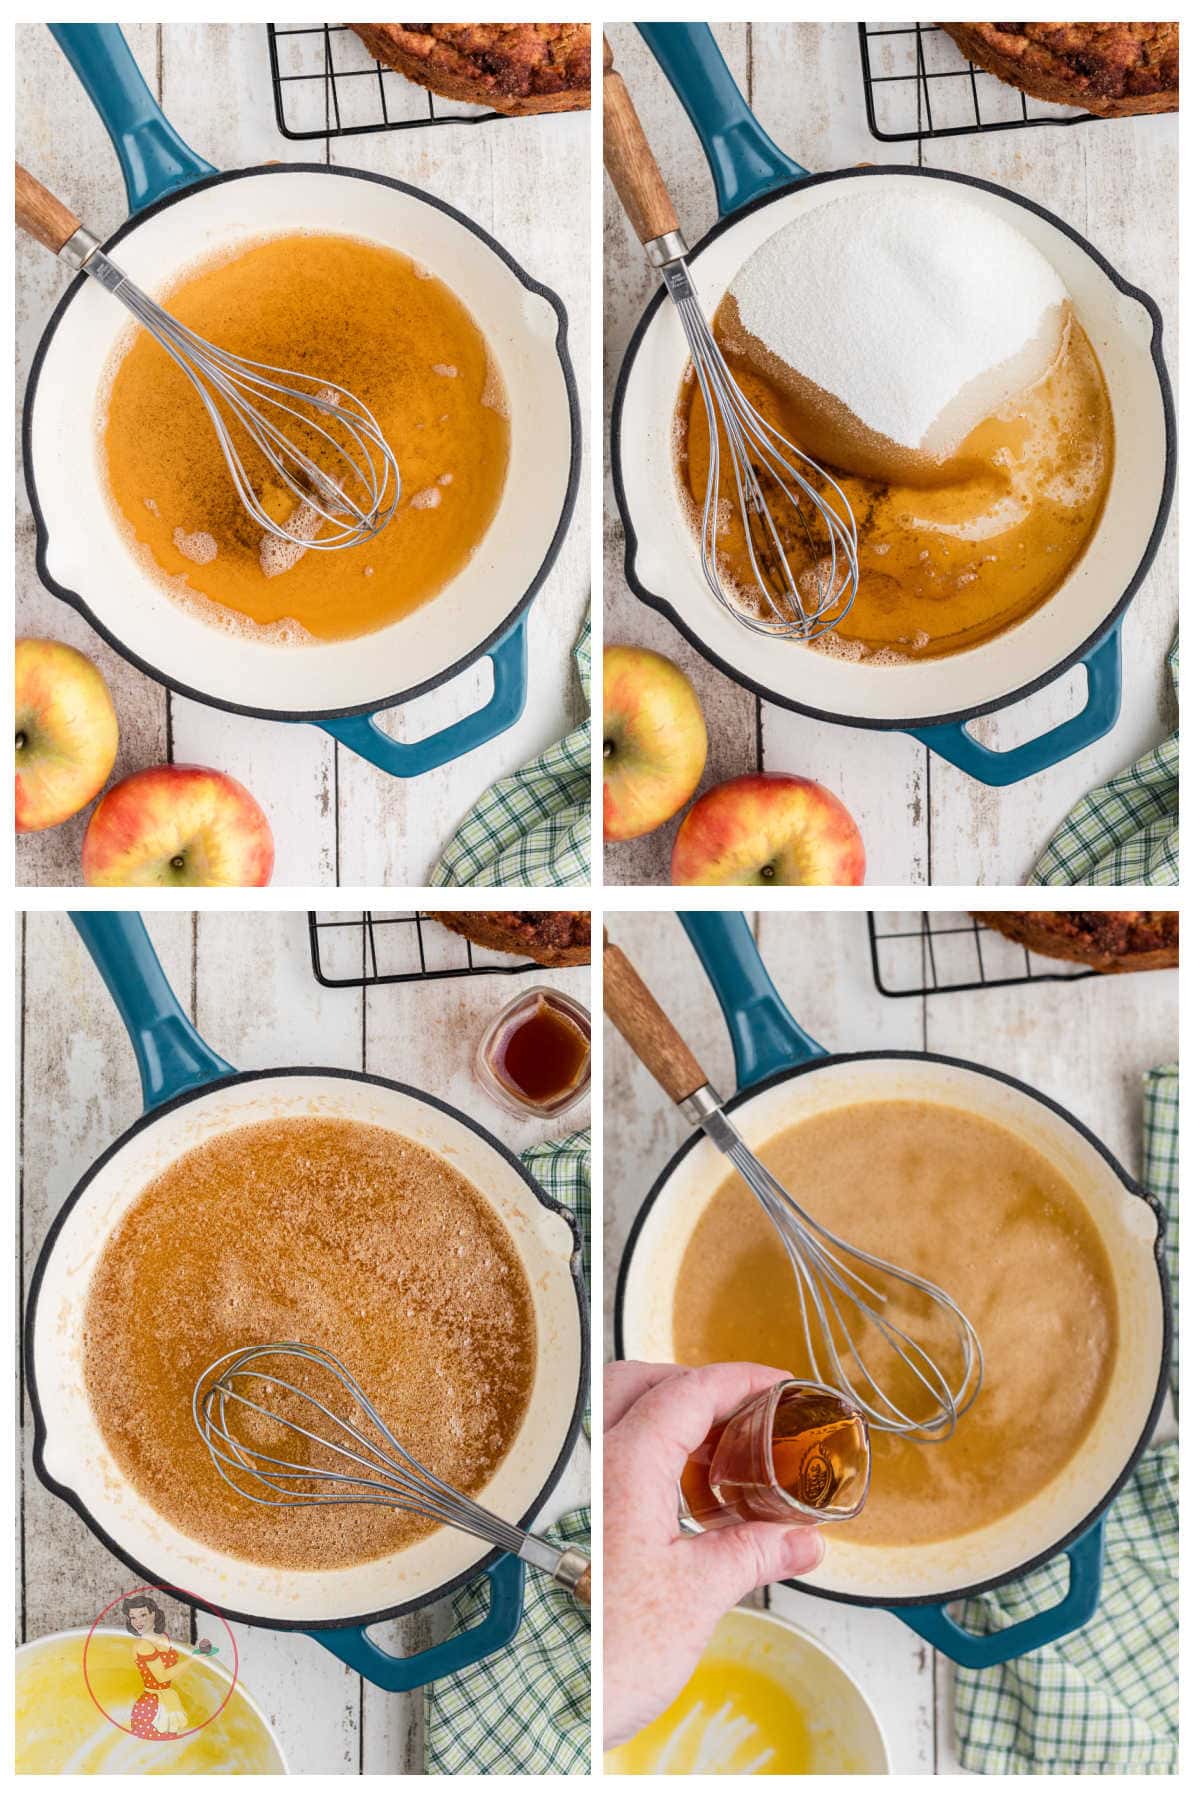 Step by step images showing how to make whiskey sauce for Irish apple cake.